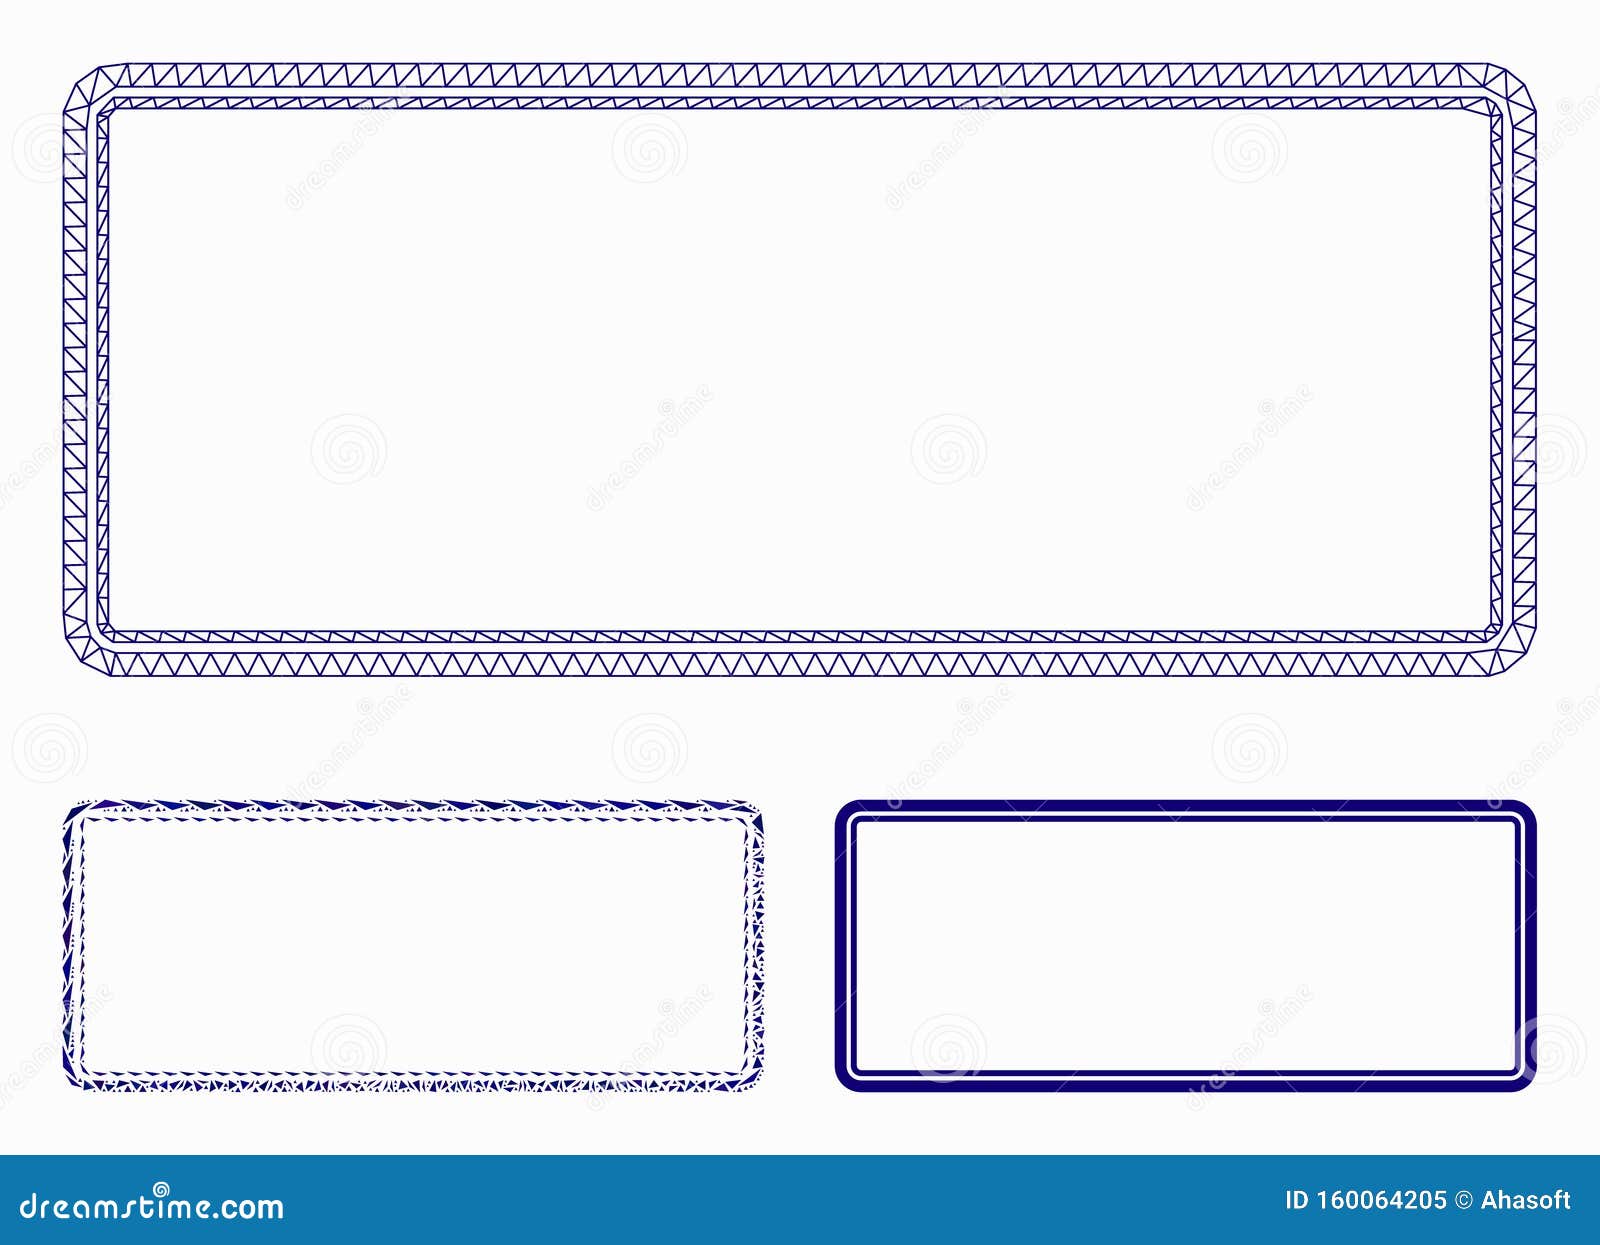 Download Double Rounded Rectangle Frame Vector Mesh Network Model ...